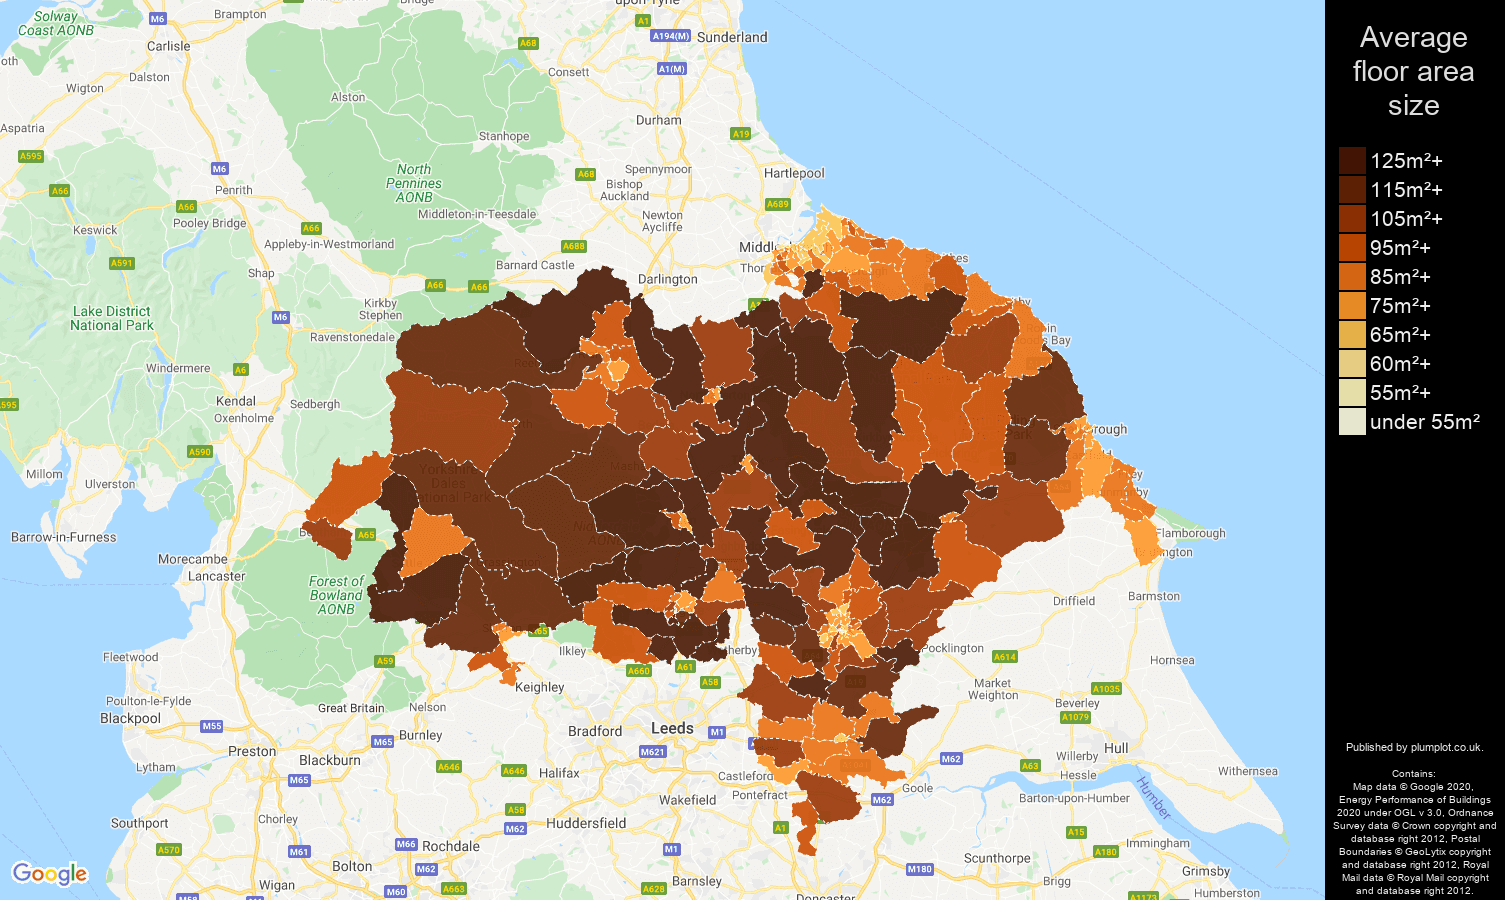 North Yorkshire map of average floor area size of properties